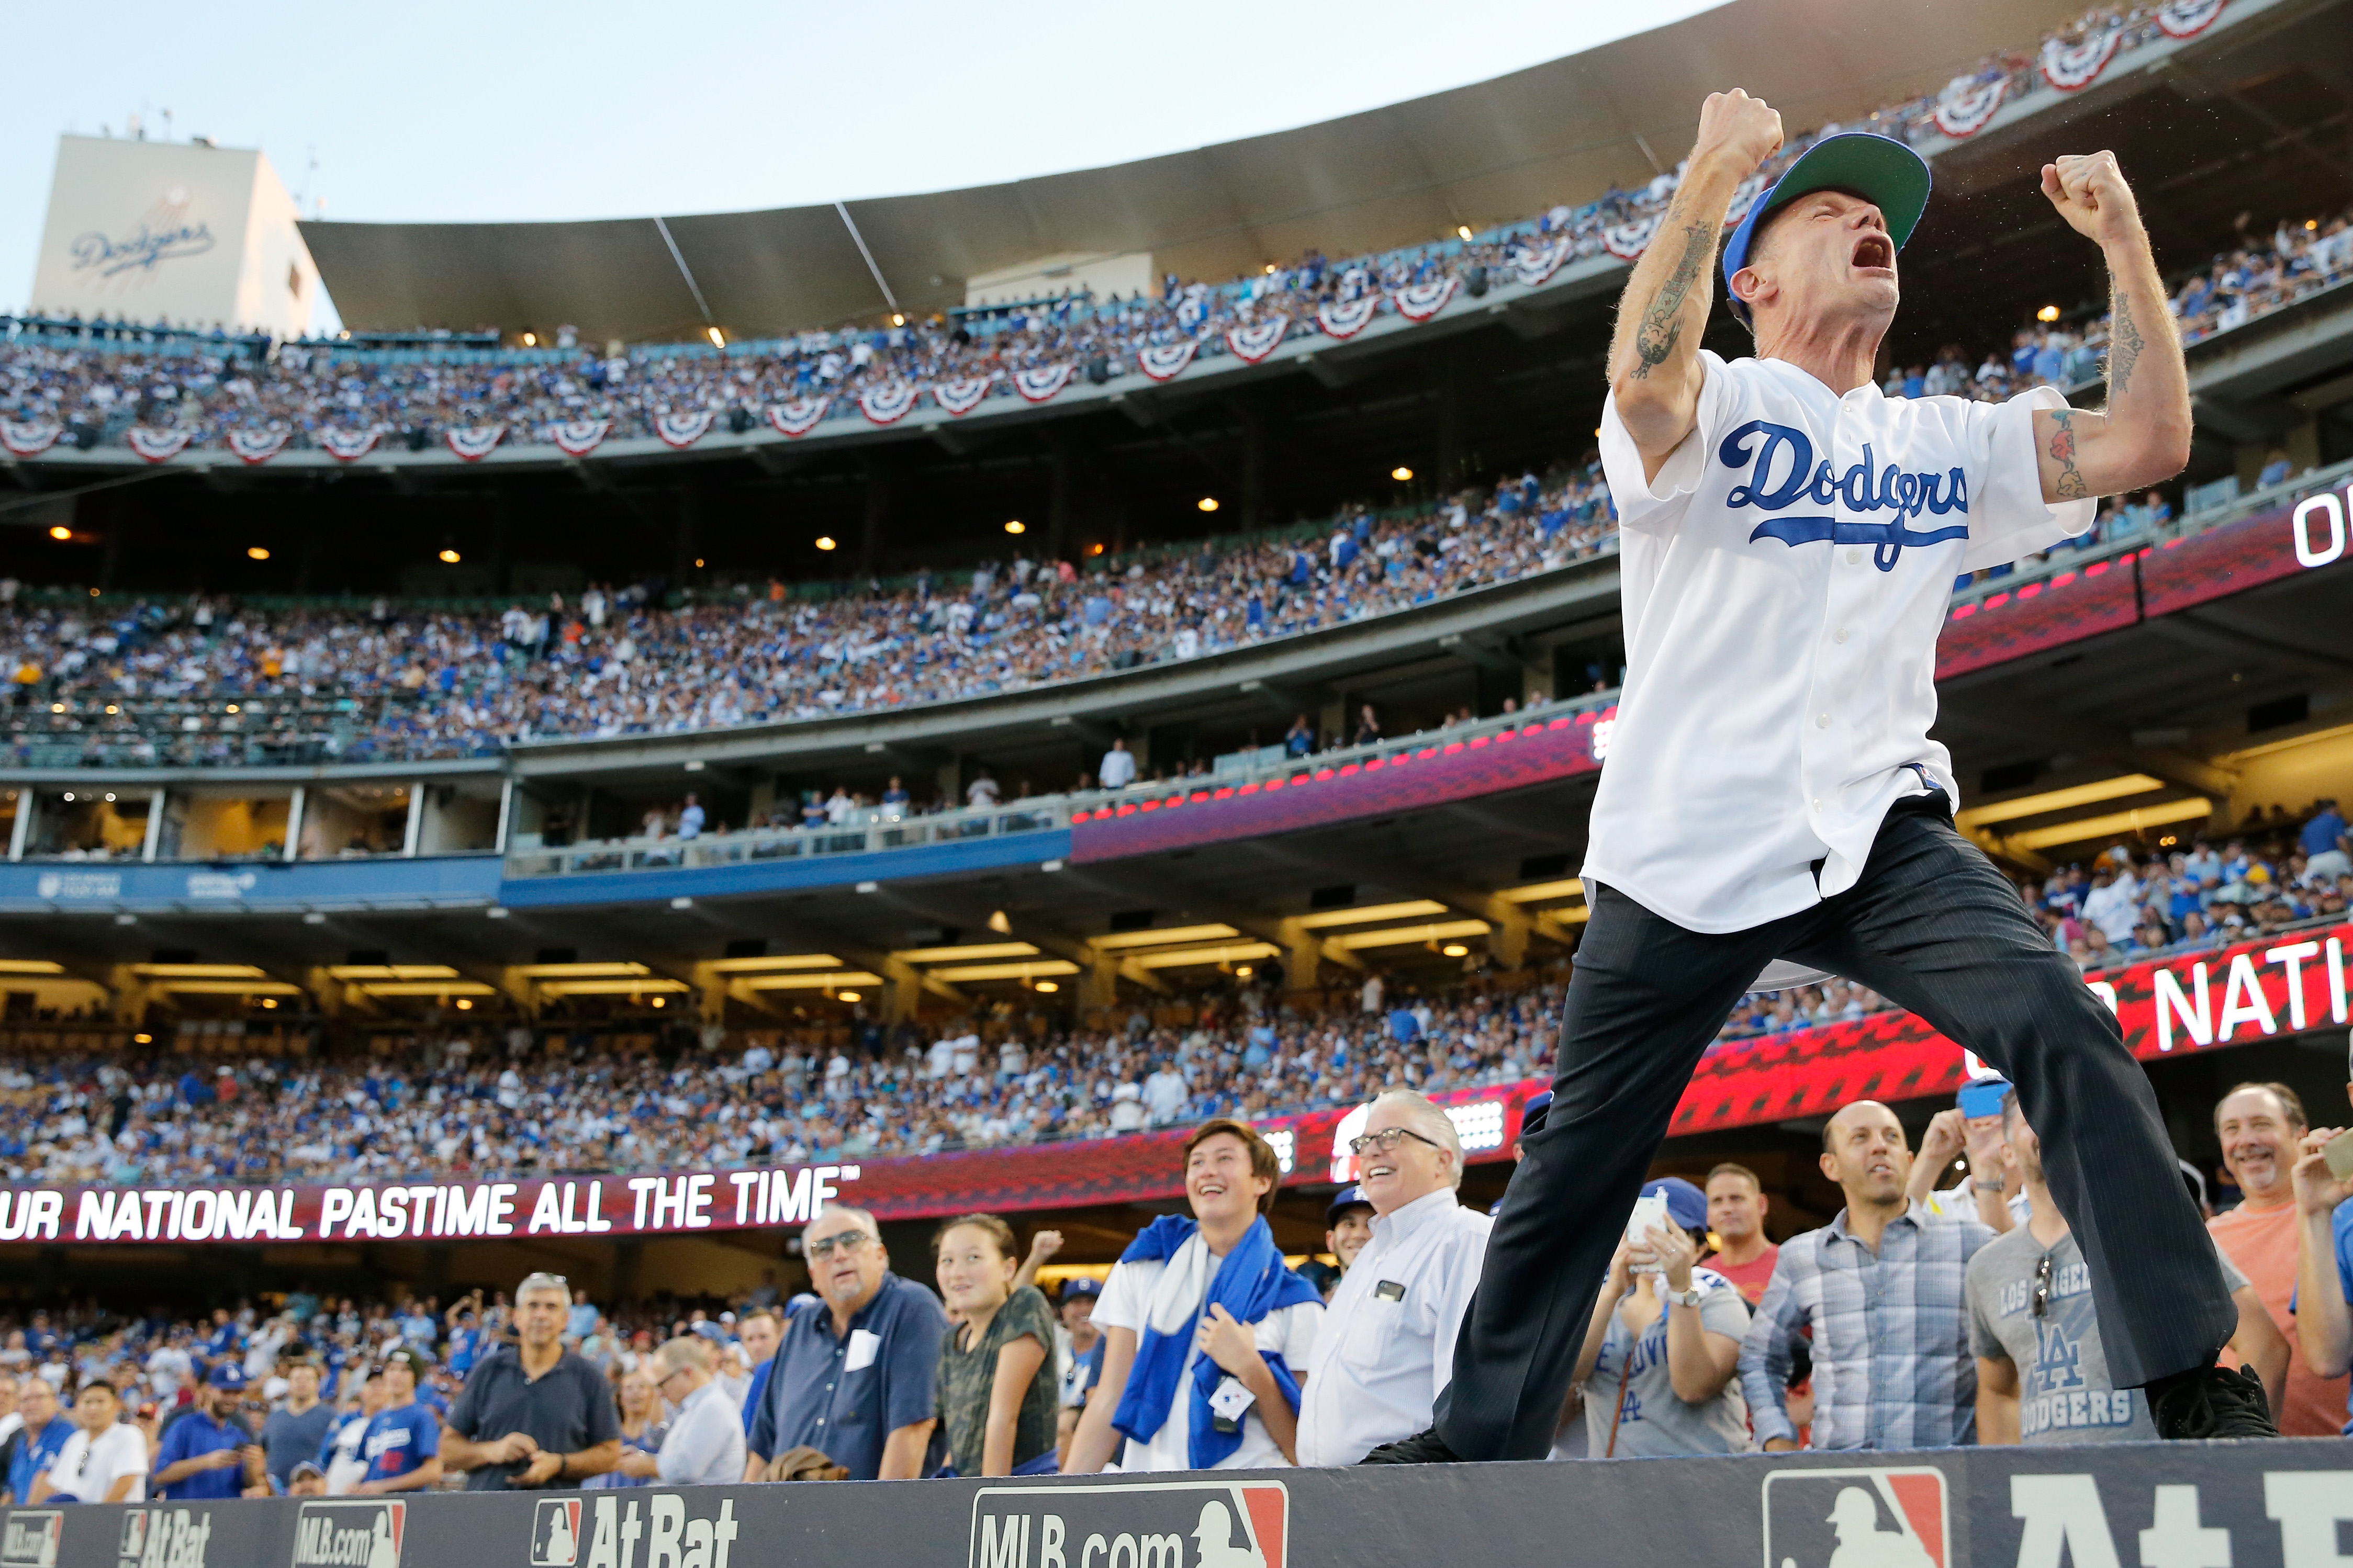 Dodger Stadium set to welcome back fans Friday. Here's what's new - ABC7 Los  Angeles